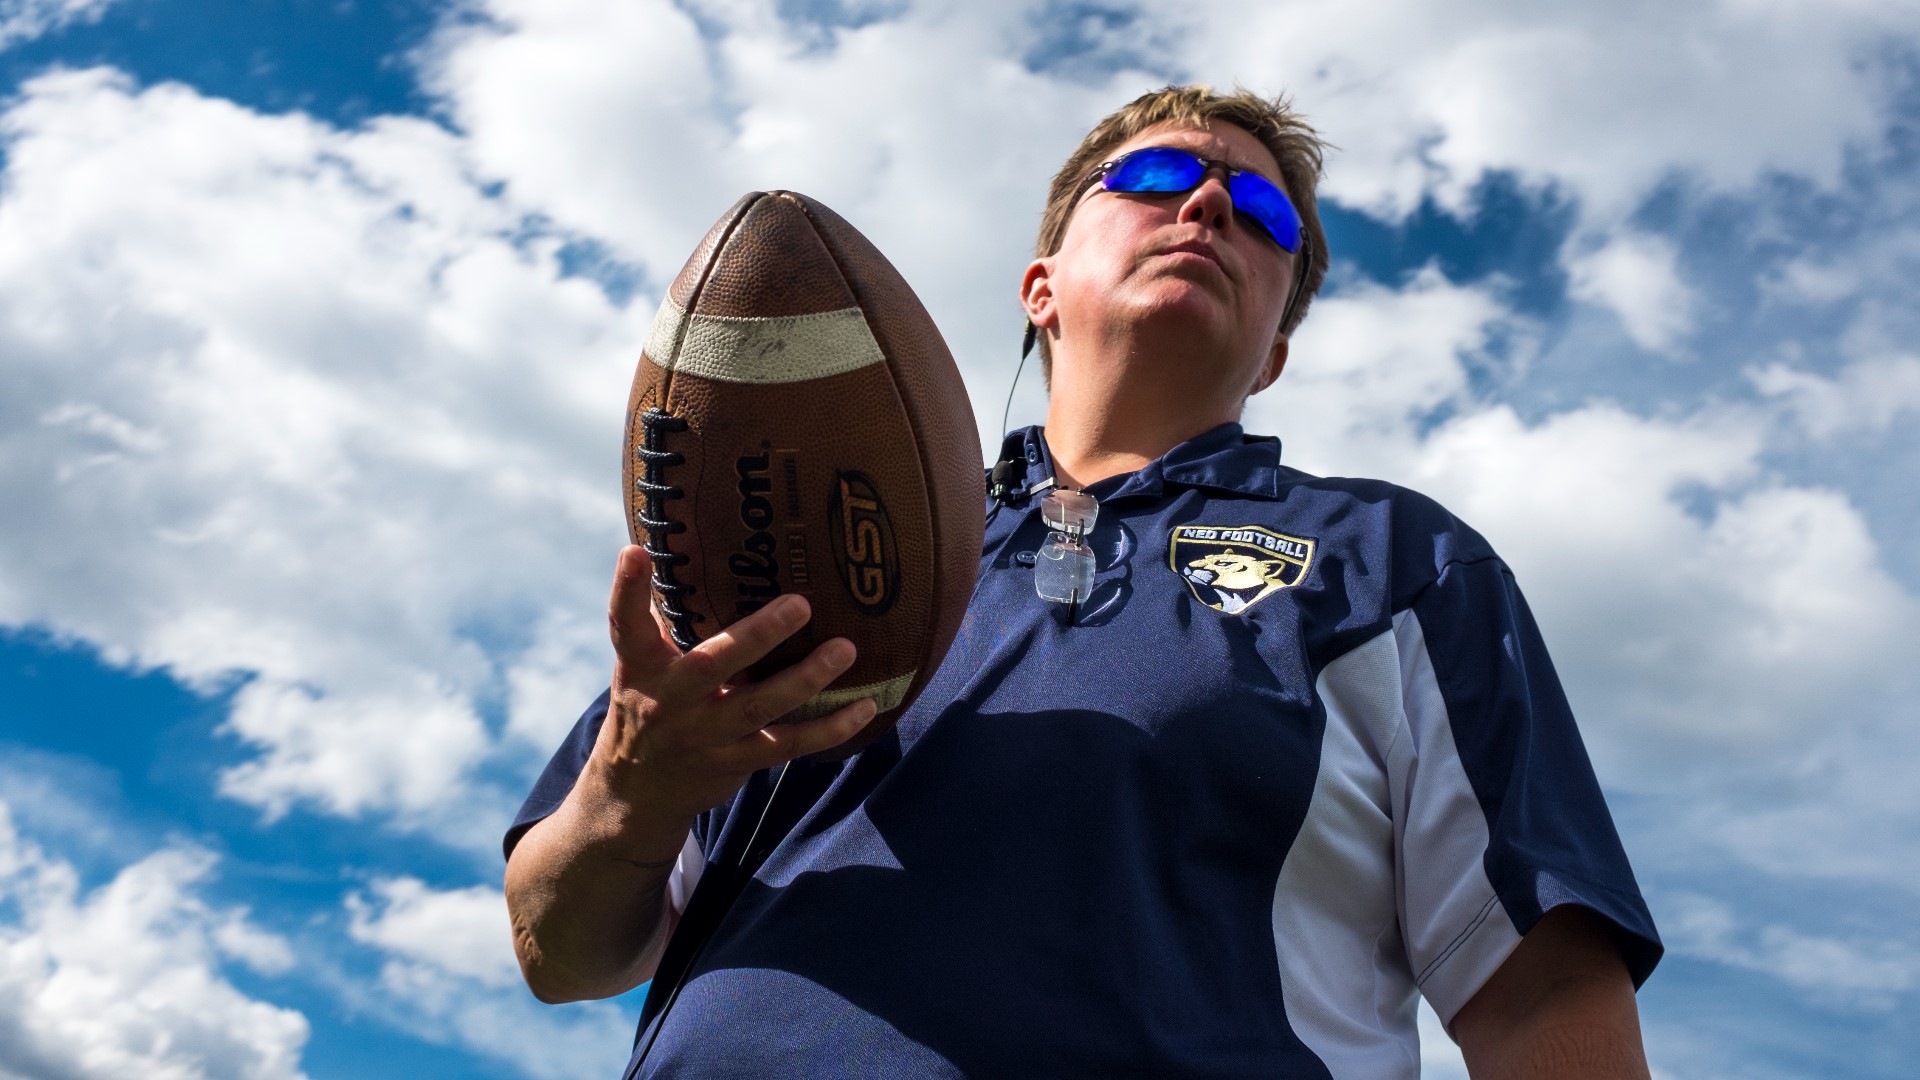 Buglione was named the first-ever female football head coach in Colorado history when she led the Nederland Panthers in 2017.